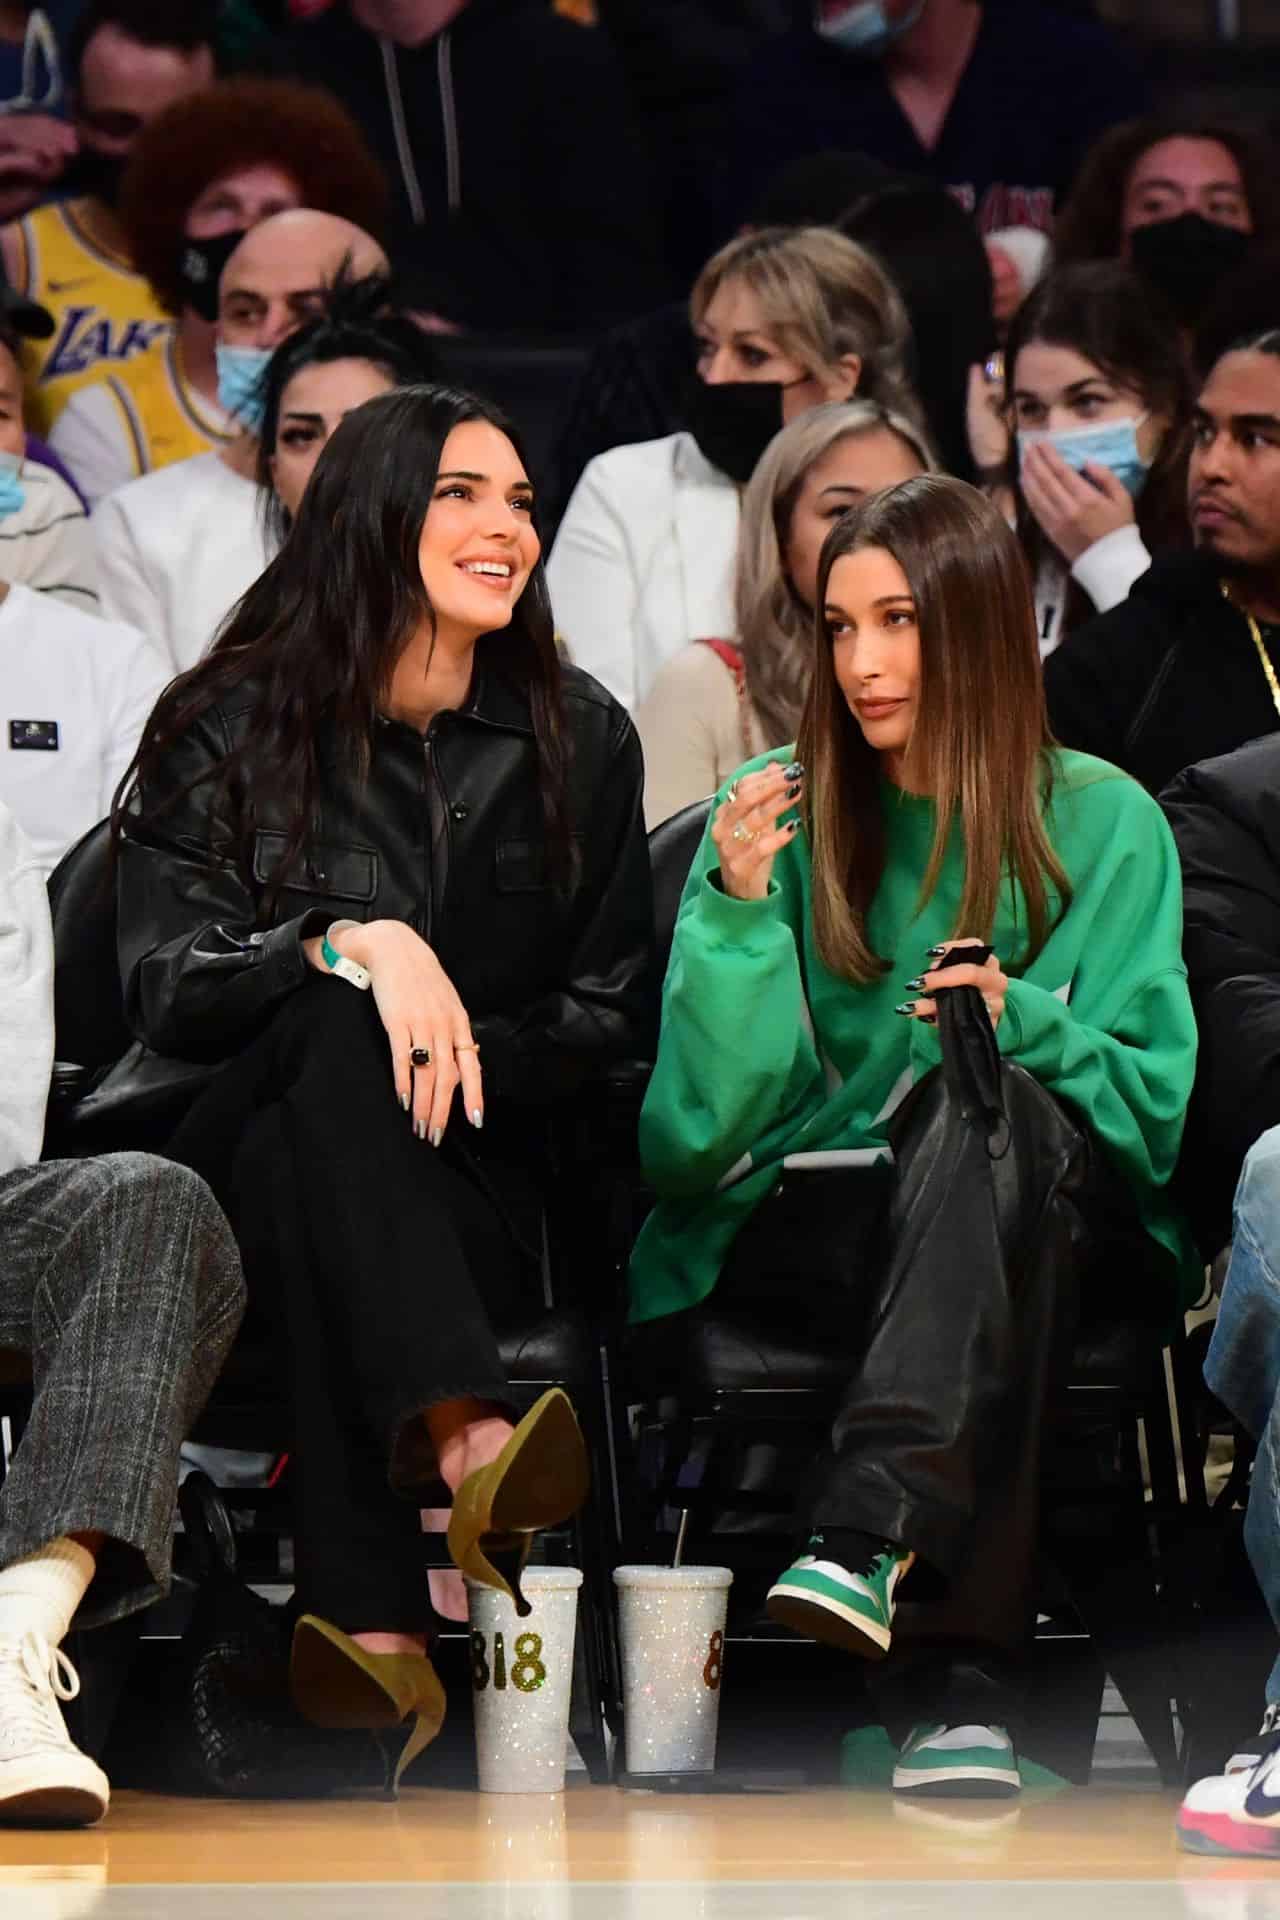 Hailey Bieber, Kendall Jenner and Justin Bieber at the Lakers vs. Suns Game